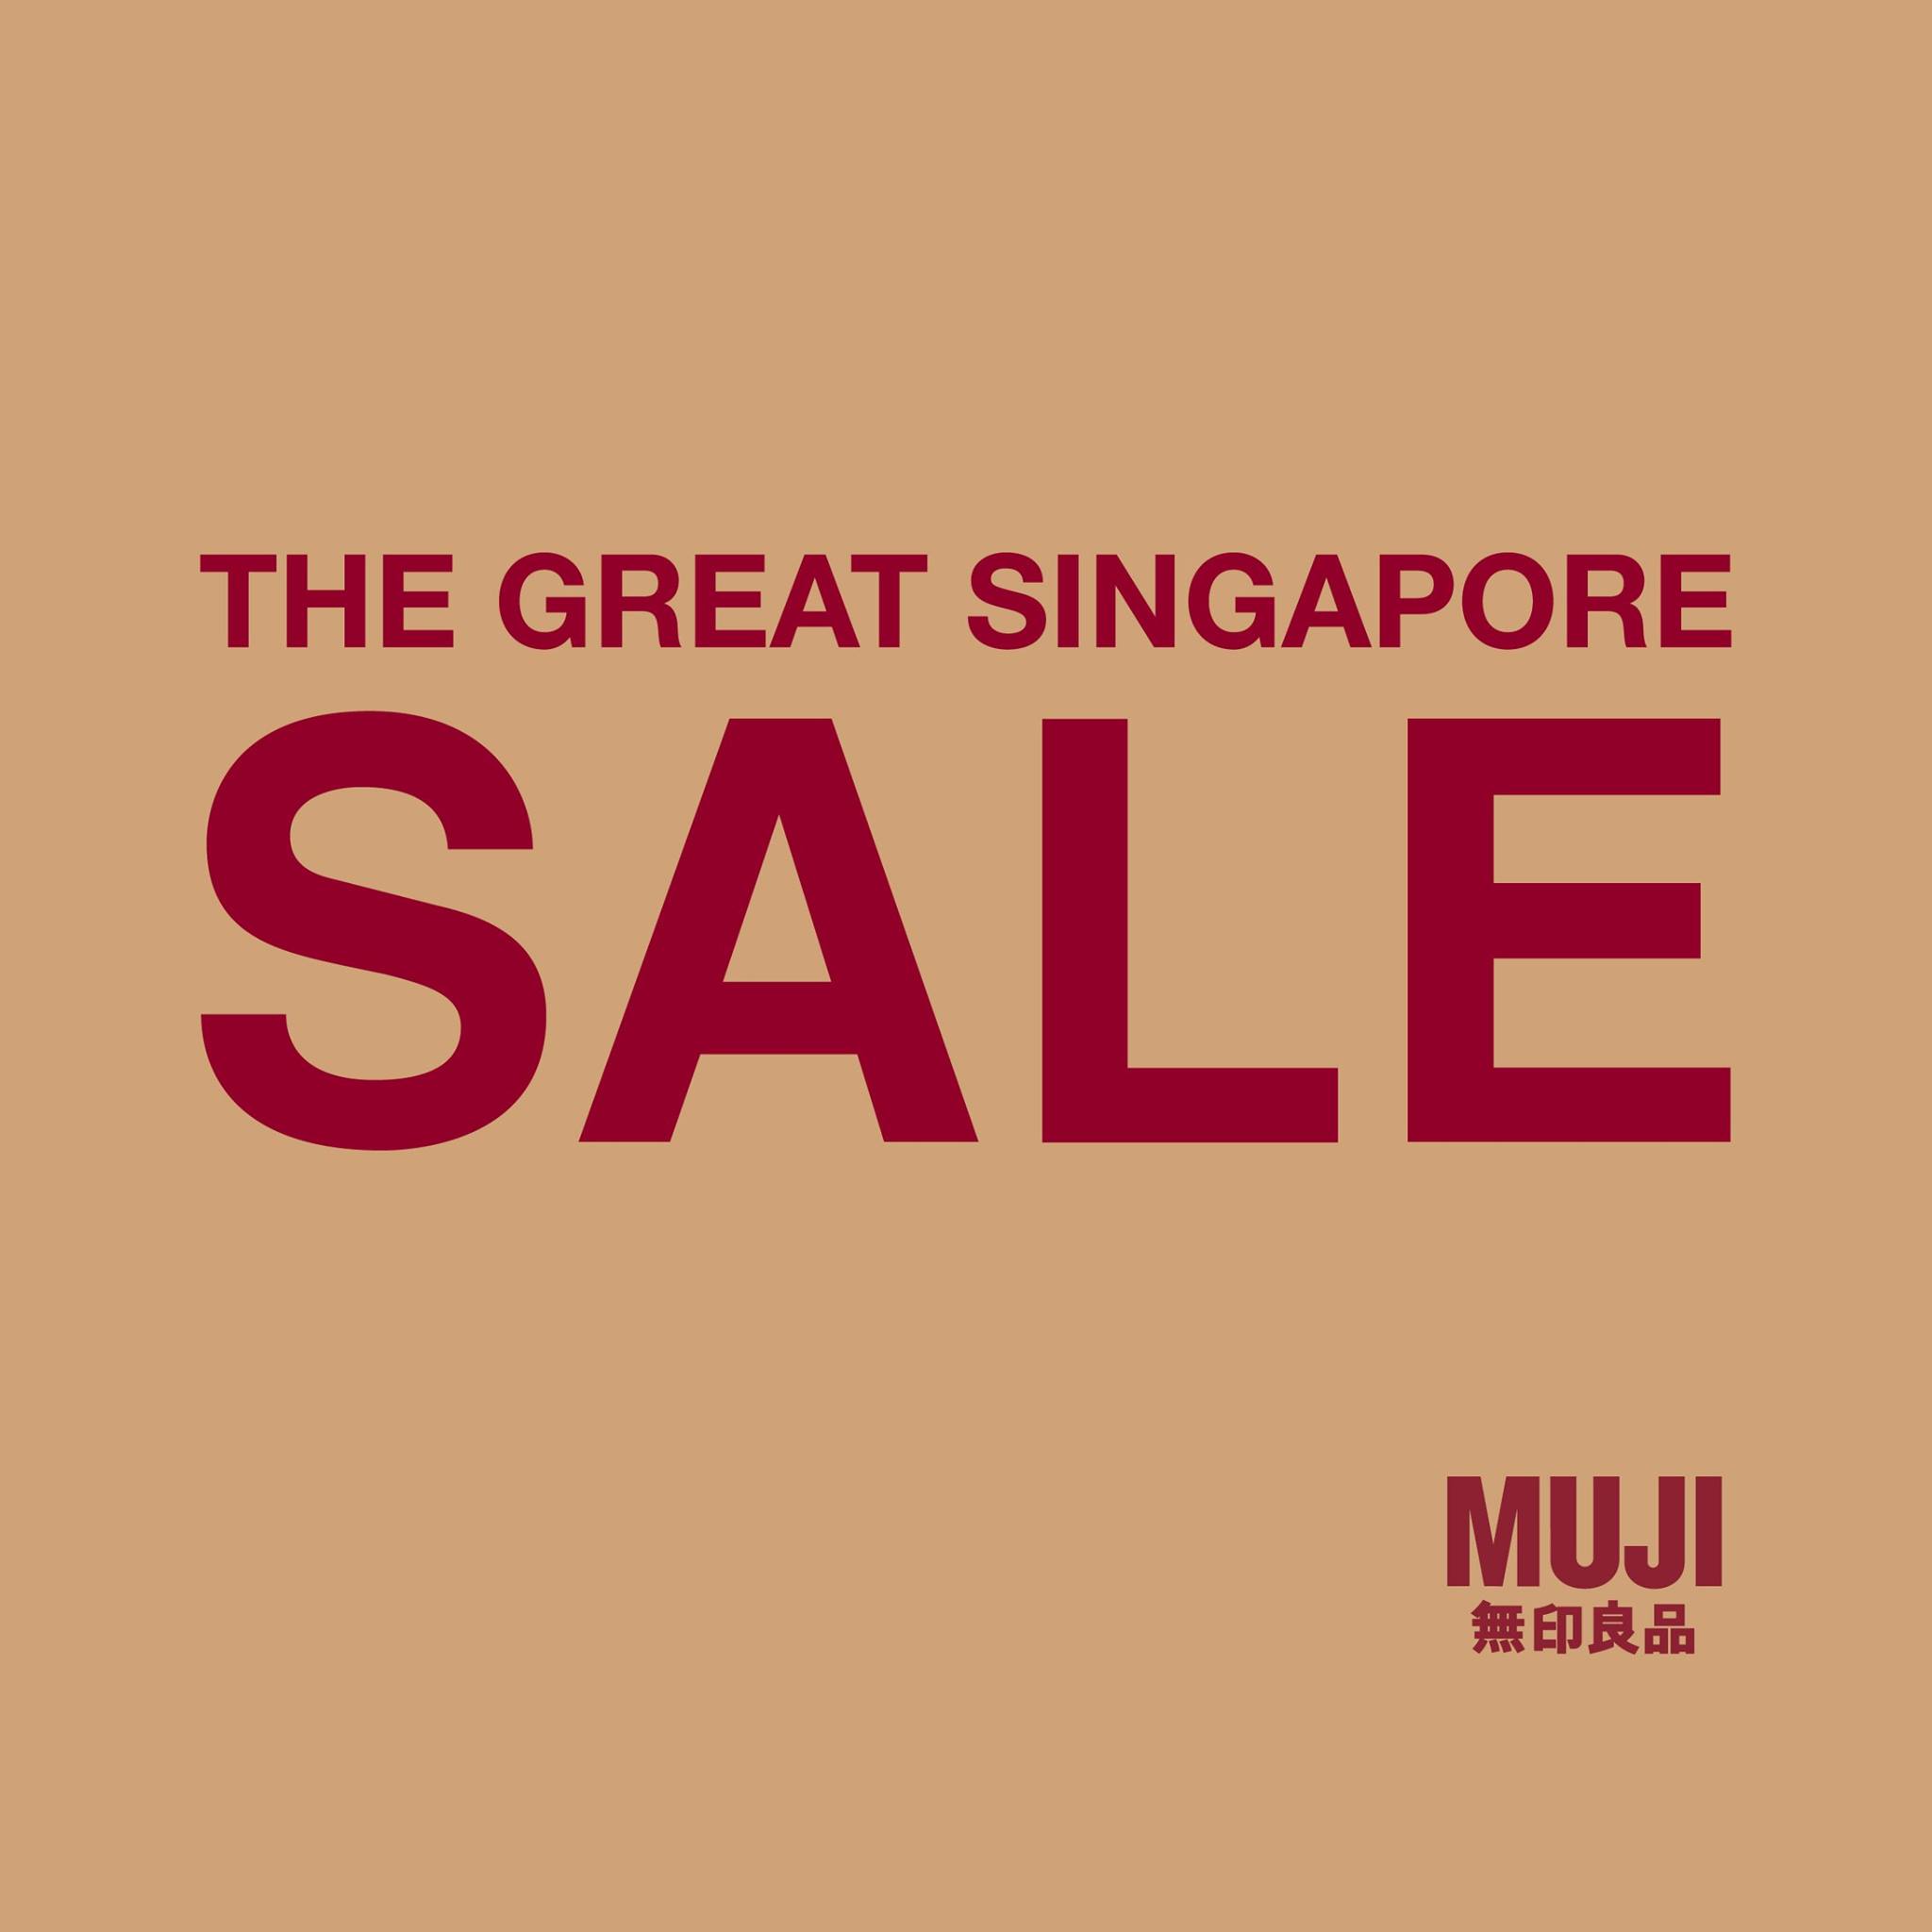 MUJI SG Great Singapore Sale Up to 50% Off